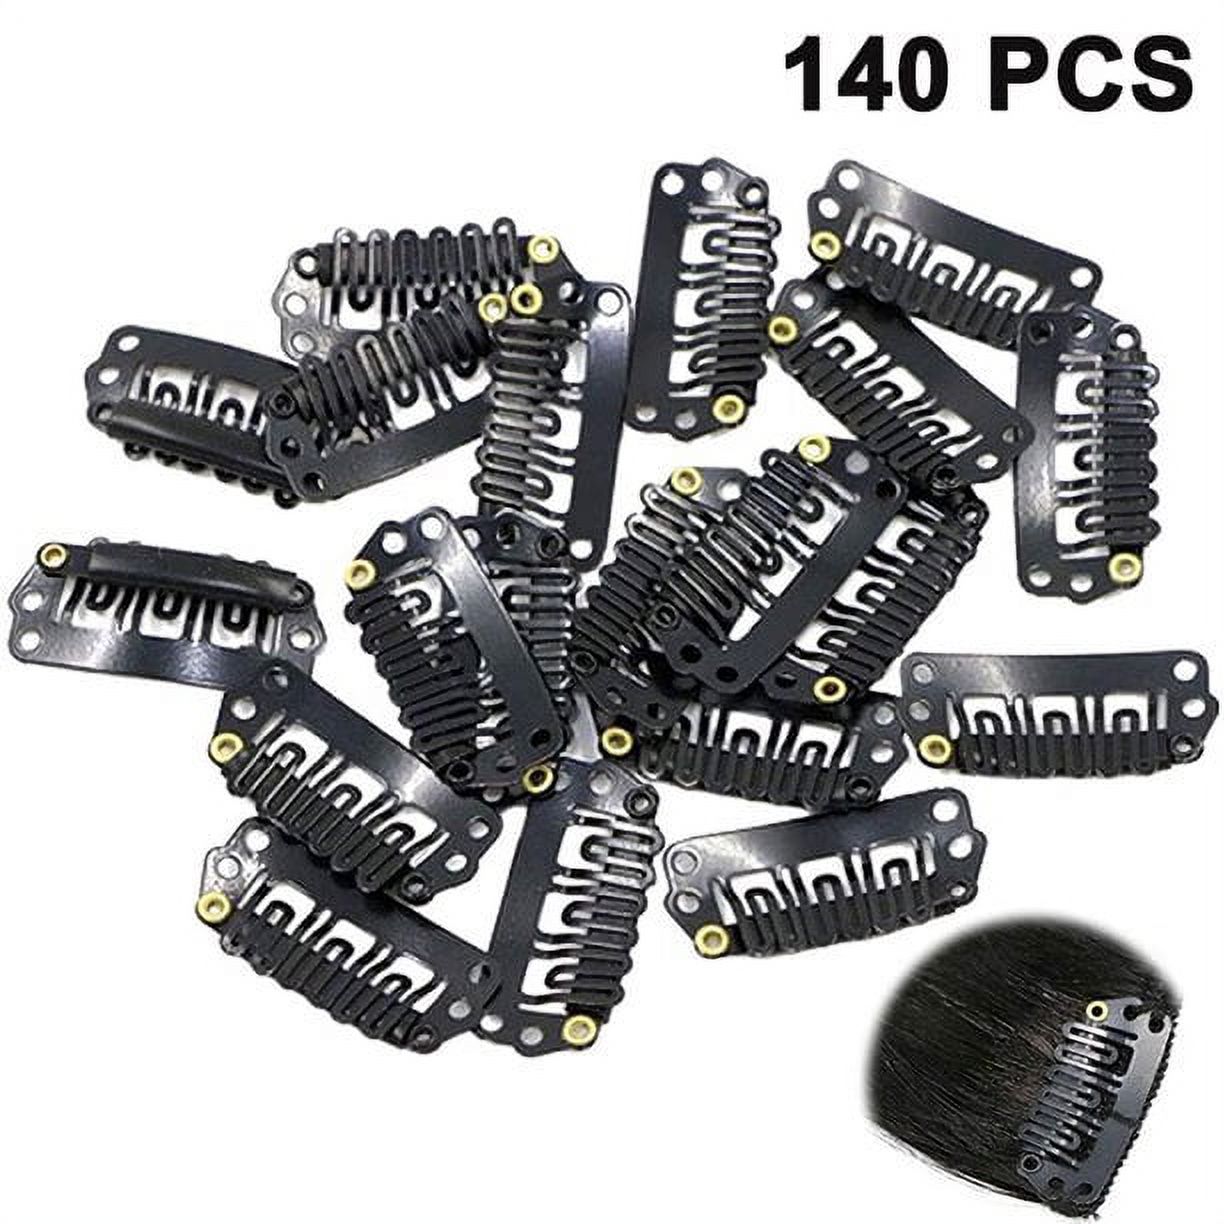 140 Piece Clips Wigs Clips U Shape Snap Clips Iron Metal Replacement Hair Clips Comb Clips for Extensions Wigs DIY Hair Extensions - image 1 of 9